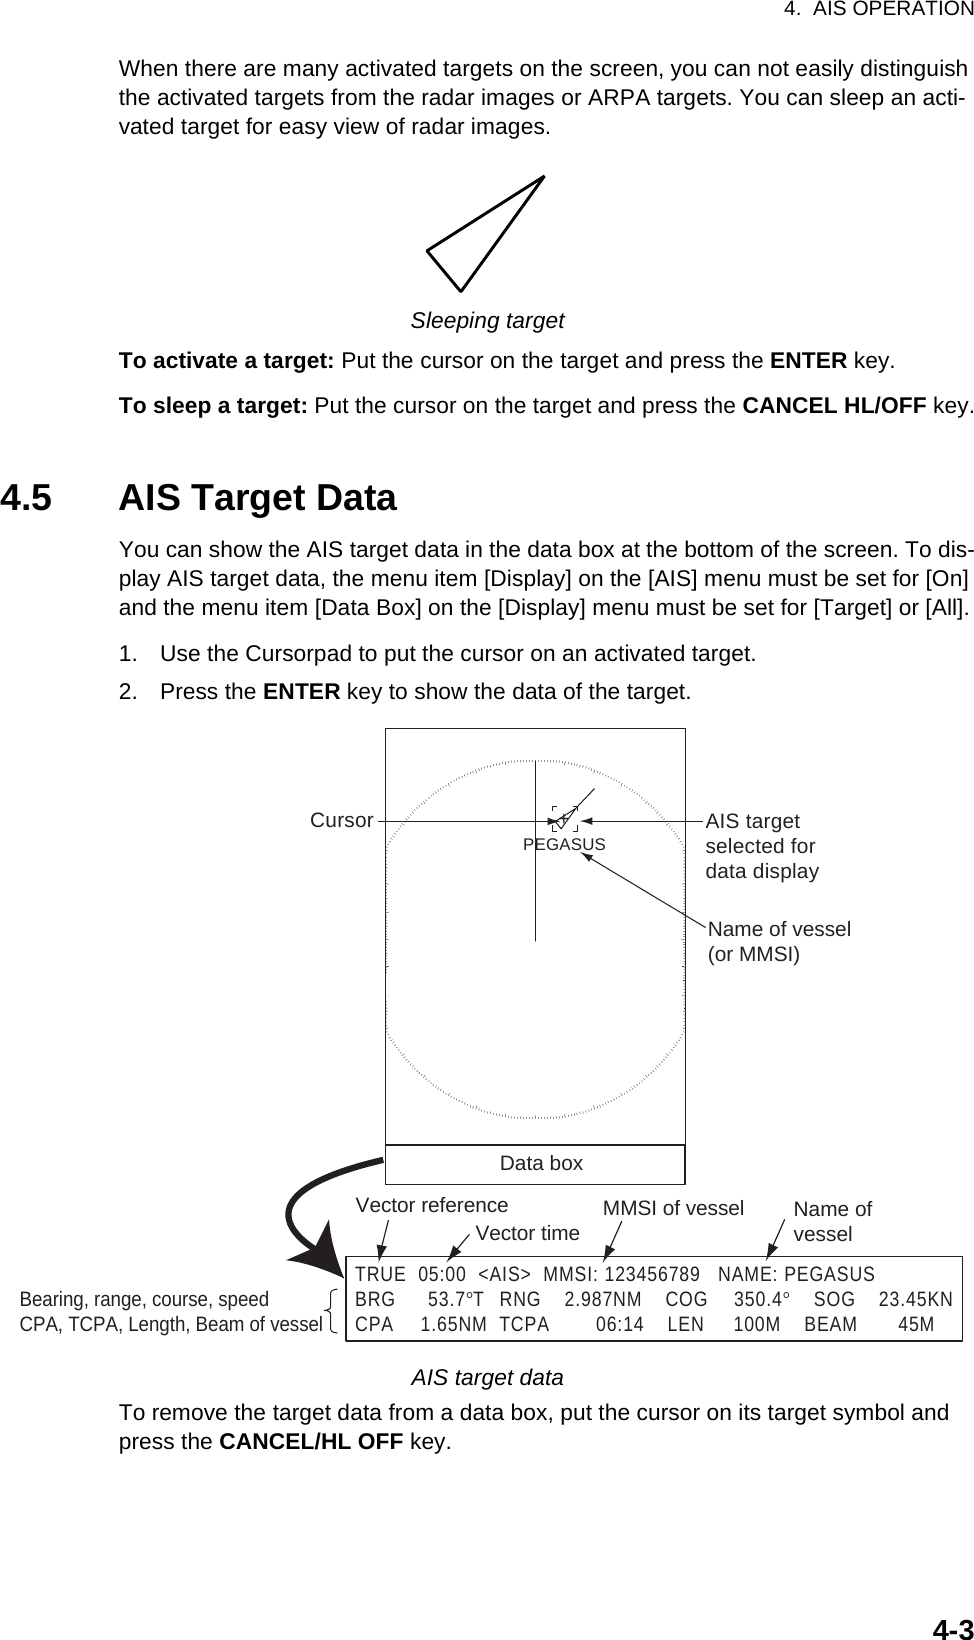 4.  AIS OPERATION4-3When there are many activated targets on the screen, you can not easily distinguish the activated targets from the radar images or ARPA targets. You can sleep an acti-vated target for easy view of radar images.Sleeping targetTo activate a target: Put the cursor on the target and press the ENTER key. To sleep a target: Put the cursor on the target and press the CANCEL HL/OFF key.4.5 AIS Target DataYou can show the AIS target data in the data box at the bottom of the screen. To dis-play AIS target data, the menu item [Display] on the [AIS] menu must be set for [On] and the menu item [Data Box] on the [Display] menu must be set for [Target] or [All].1. Use the Cursorpad to put the cursor on an activated target.2. Press the ENTER key to show the data of the target.AIS target dataTo remove the target data from a data box, put the cursor on its target symbol and press the CANCEL/HL OFF key.AIS targetselected fordata displayMMSI of vessel Name ofvessel       PEGASUSCursorData boxTRUE  05:00  &lt;AIS&gt;  MMSI: 123456789   NAME: PEGASUSBRG      53.7°T   RNG    2.987NM    COG    350.4°    SOG    23.45KNCPA    1.65NM  TCPA        06:14    LEN     100M    BEAM       45M    Vector referenceVector timeBearing, range, course, speed CPA, TCPA, Length, Beam of vessel+Name of vessel(or MMSI)